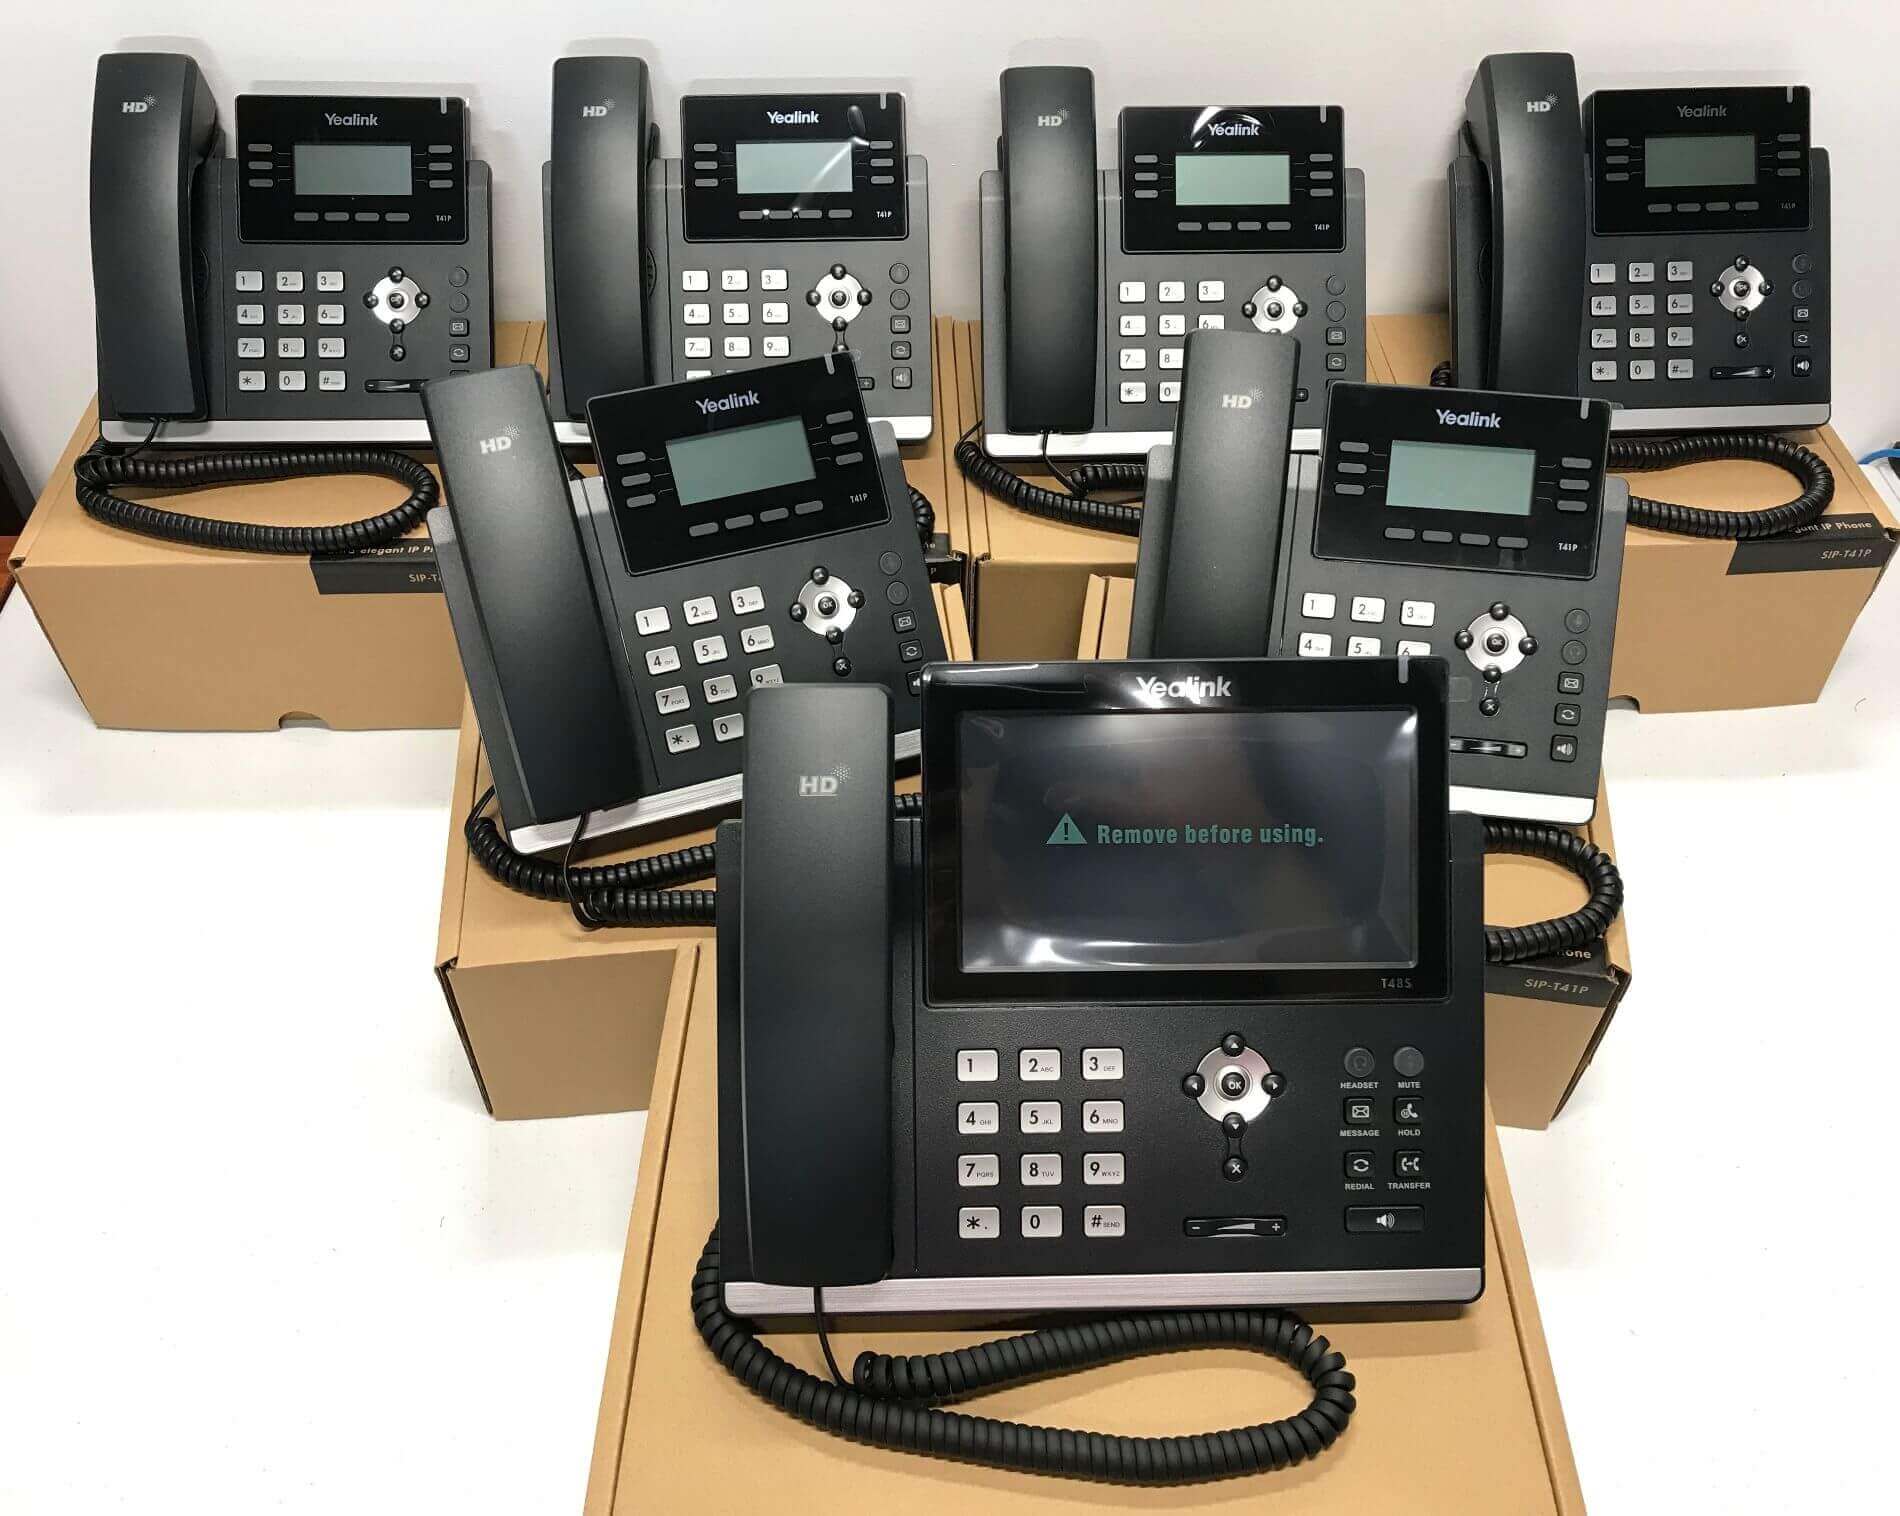 Cloud Hosted Phone System with 7 Yealink handsets